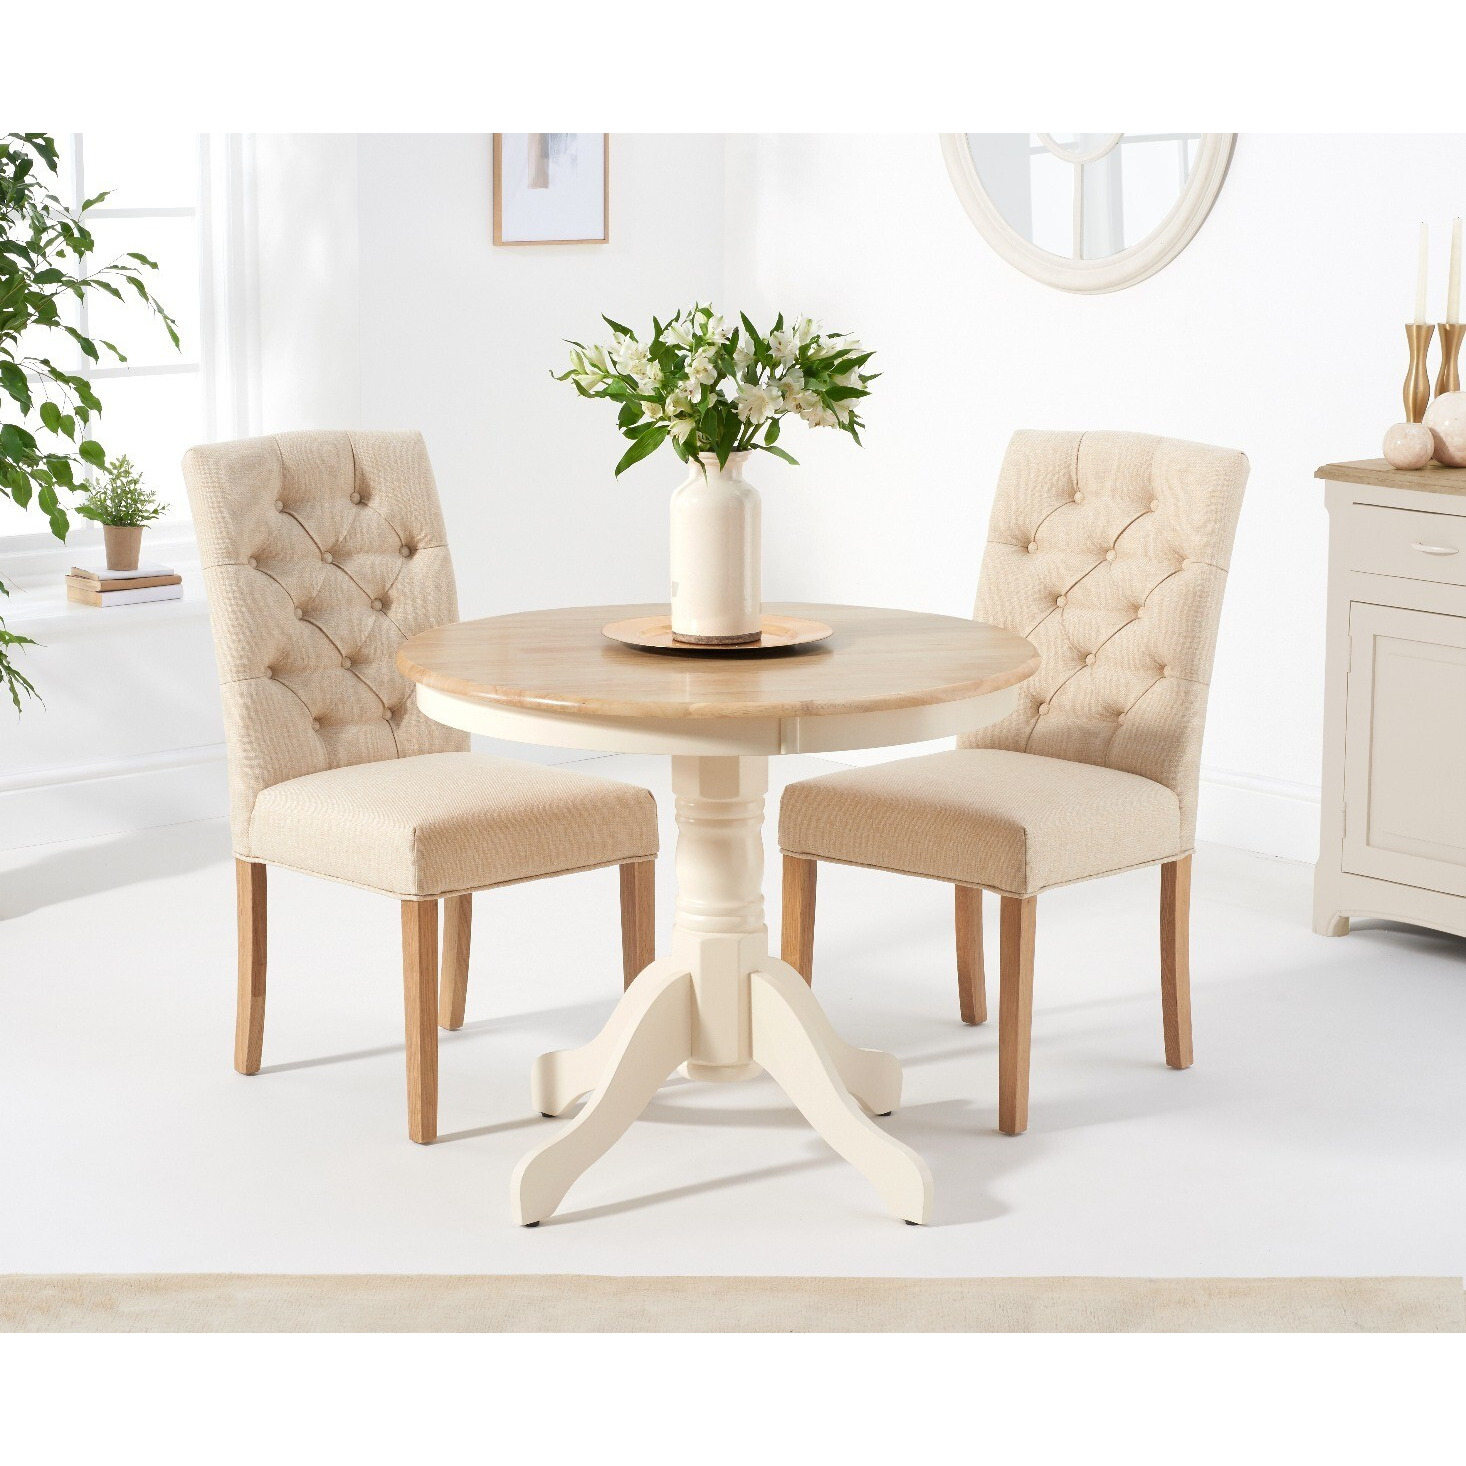 Epsom 90cm Oak and Cream Painted Dining Table With 2 Cream Claudia Fabric Chairs